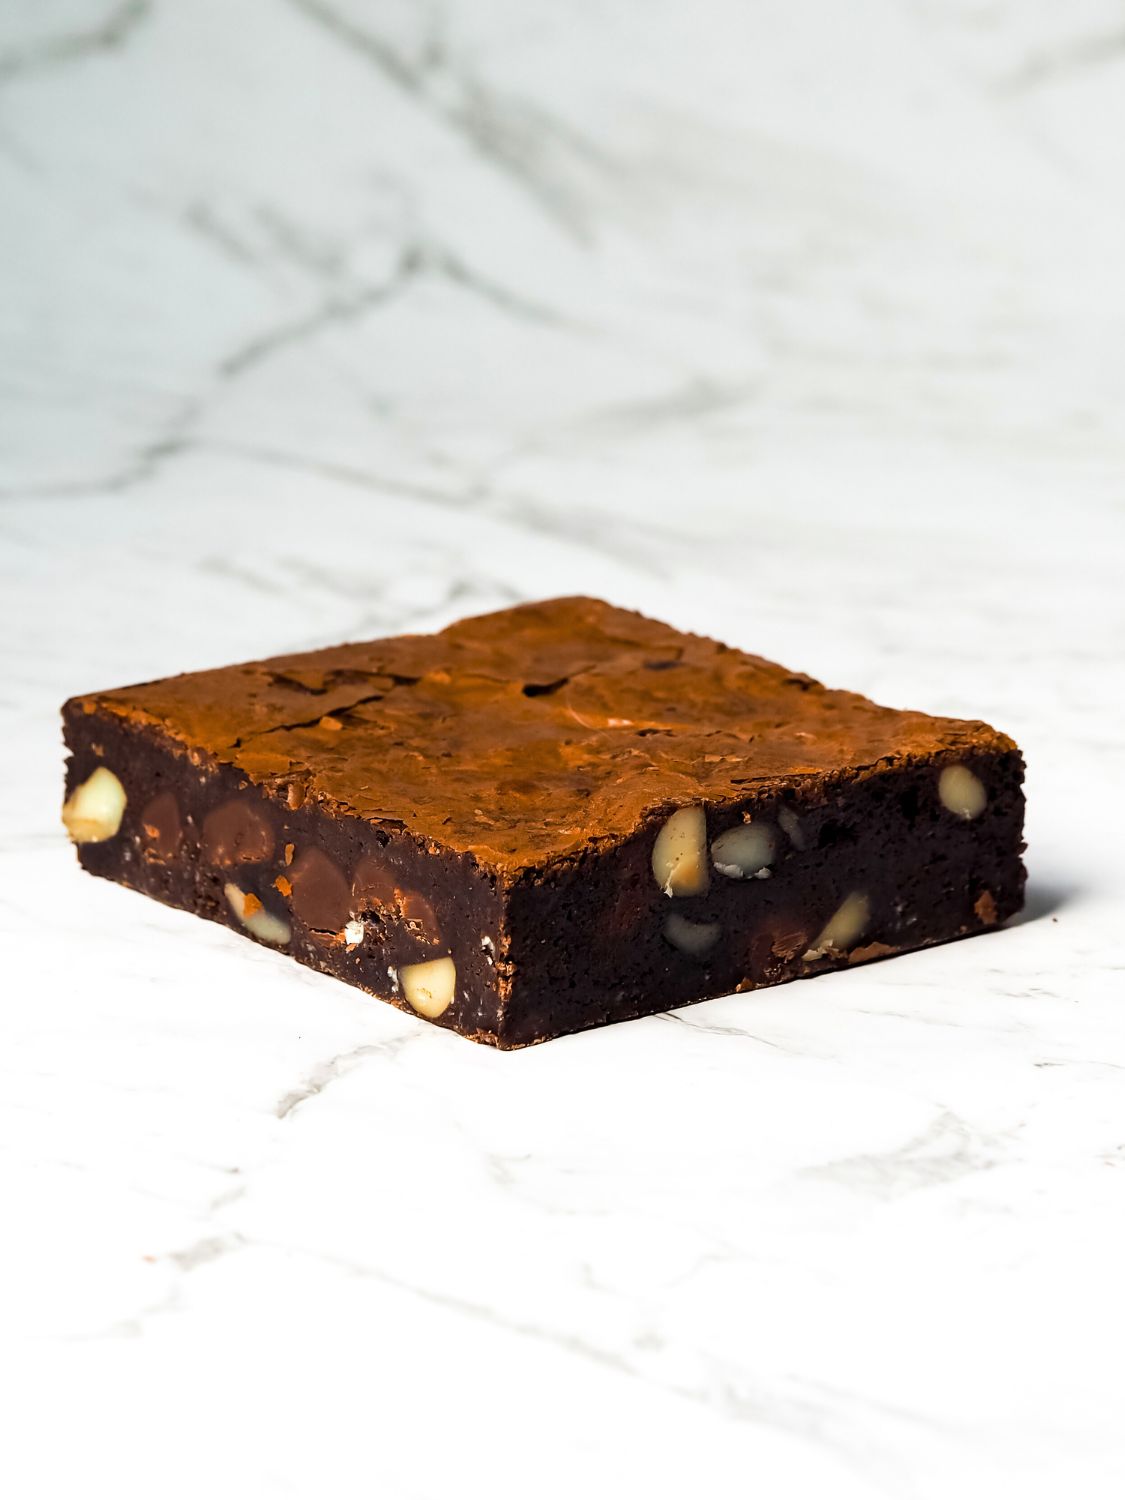 Chocolate Brownie Gluten Free Brownie Gluten Free Chocolate Brownie The Kingpin Brownie Block 100% Gluten Free Macadamia Dark Chocolate Brownie Best Gluten Free Brownie Melbourne Australia Wide Shipping Next Day Delivery Melbourne Safe for Coeliacs Dedicated Gluten Free Bakery